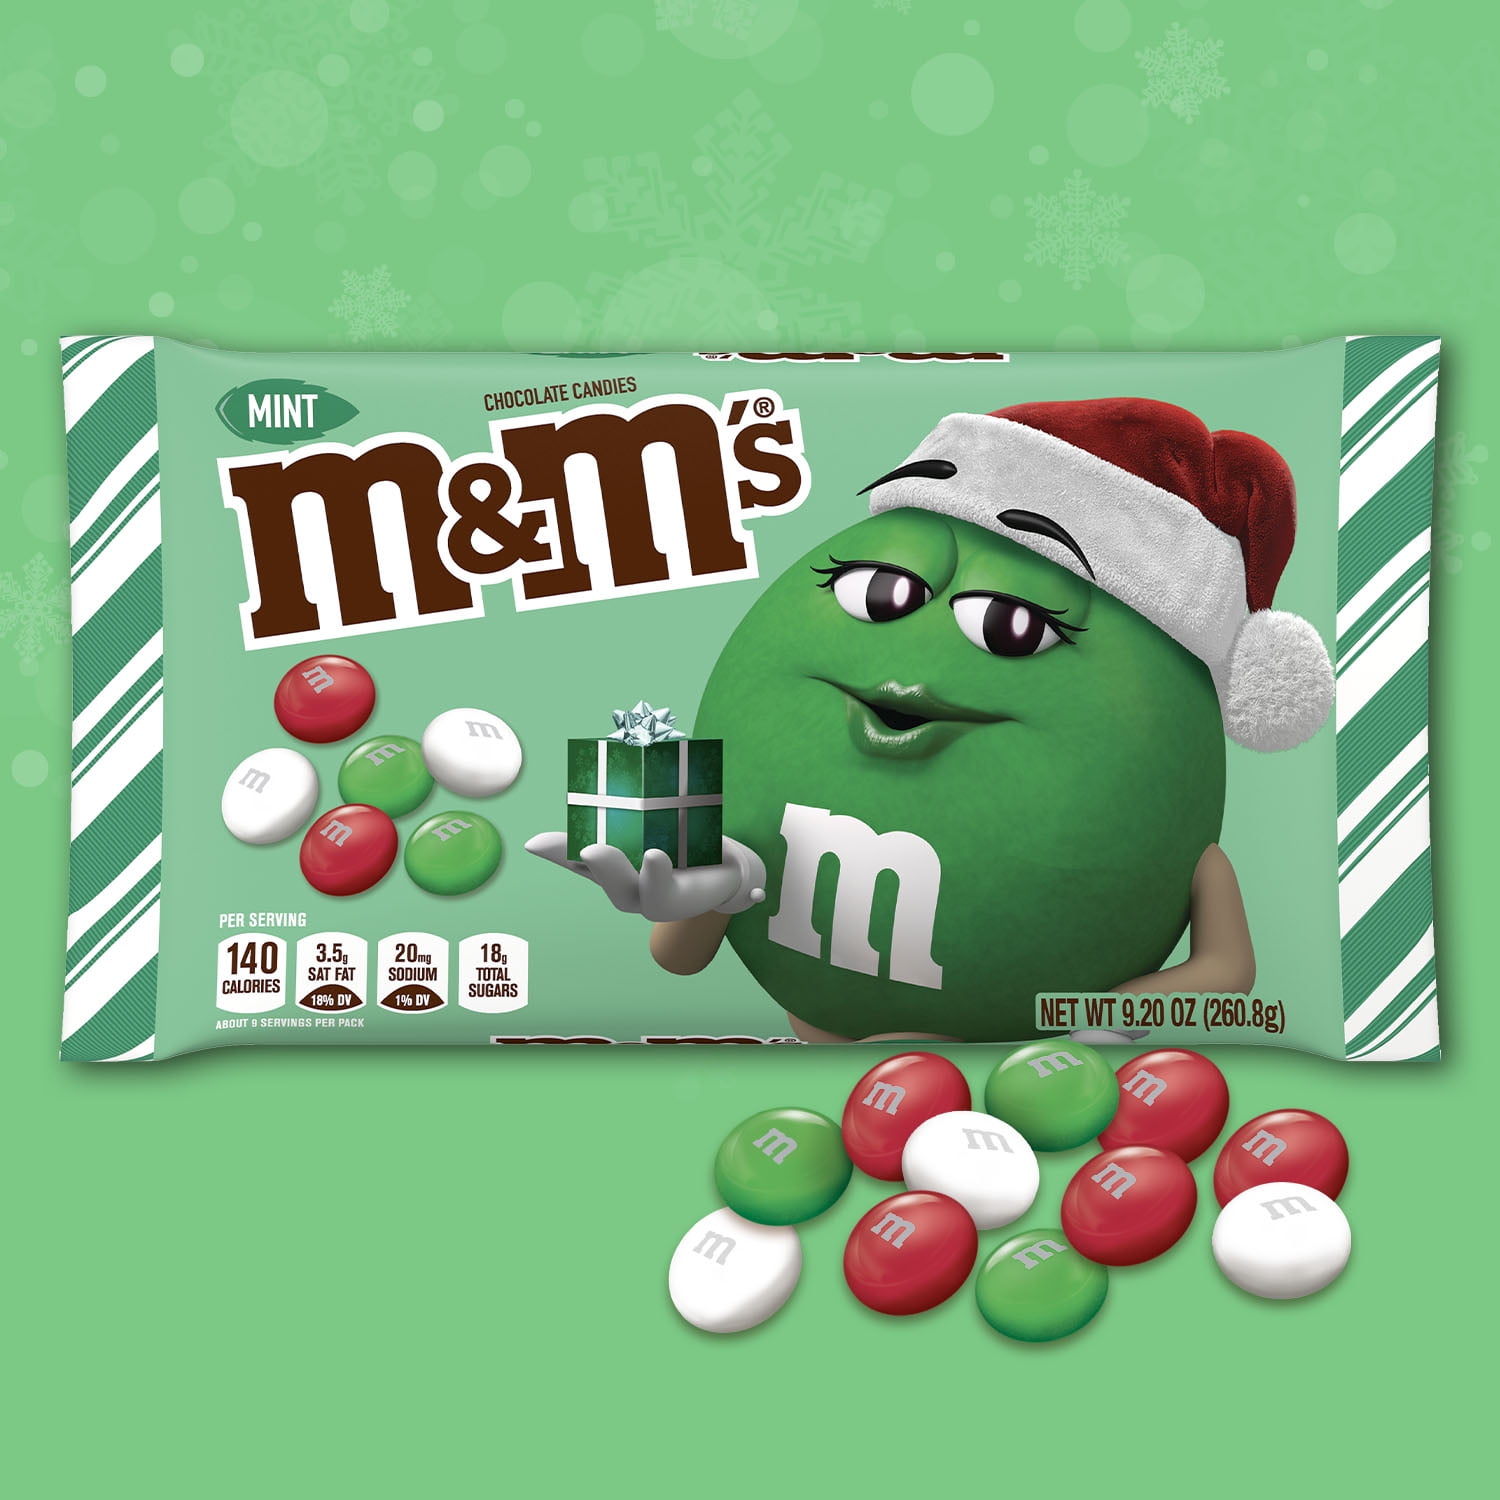 CHOCOLATE_GIFTS_LA on X: M&M'S MINT DARK CHOCOLATE 1.5 OZ PACKS/CASES  OF 24 - $25 SHIPS FREE WORLDWIDE - GUARANTEED FRESH - BEST PRICE ANYWHERE  BUY HERE:  #chocolate #candy #milkchocolate #sweets  #fathersday #